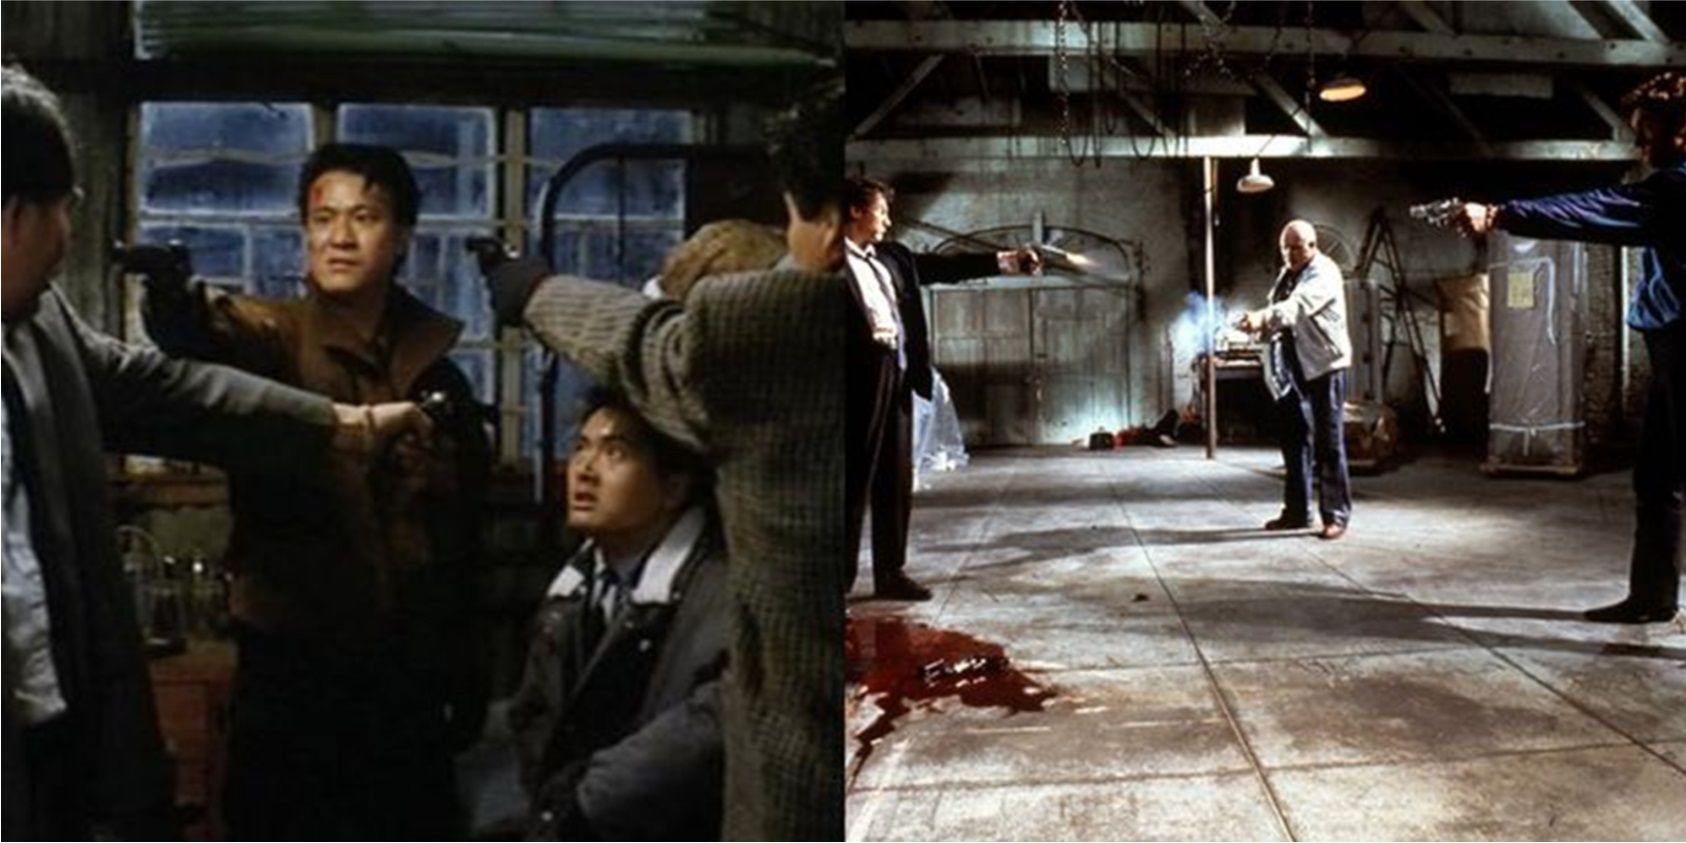 Split image of armed standoffs in Reservoir Dogs and City on Fire